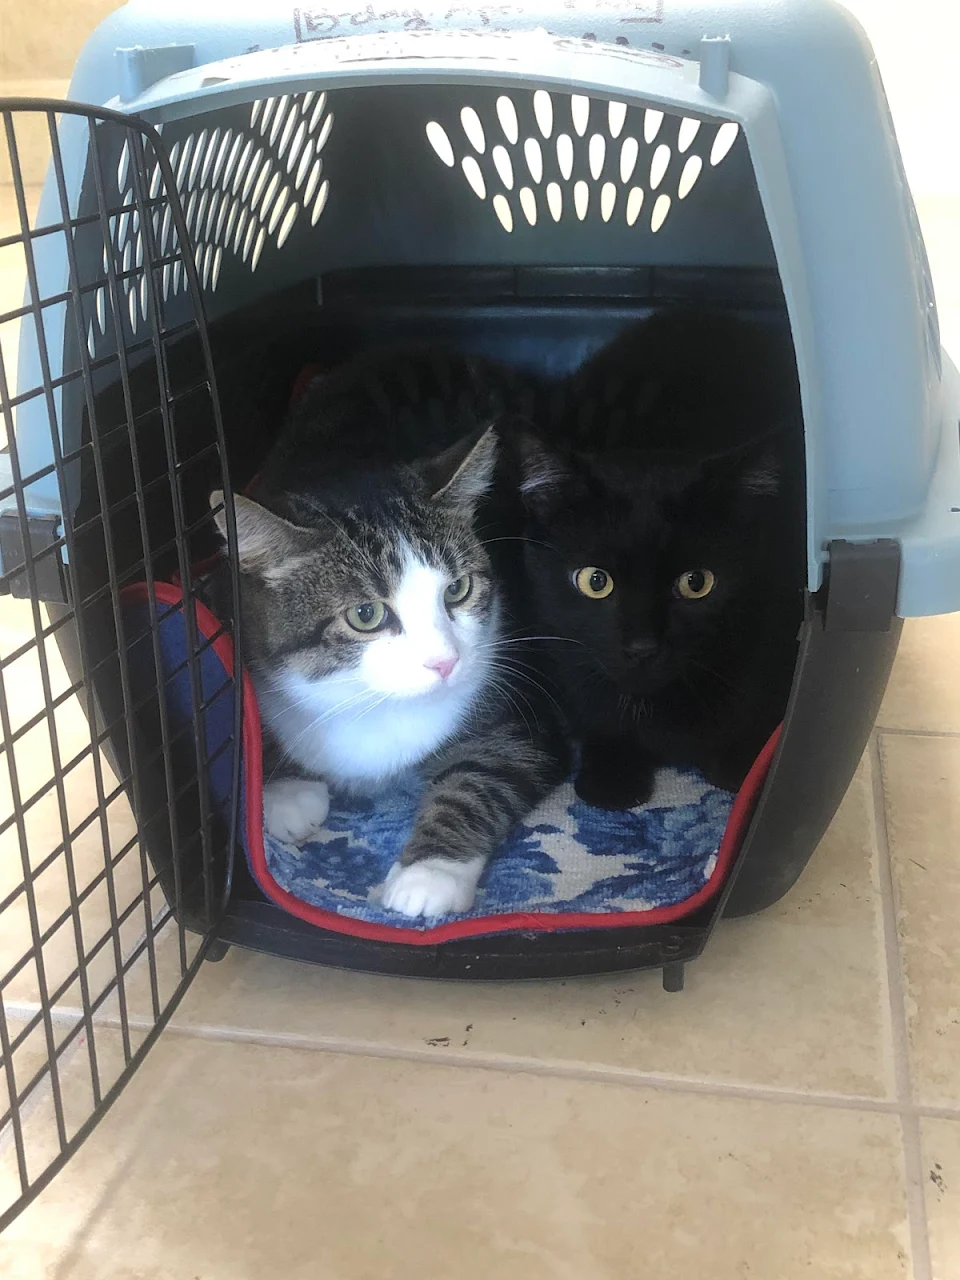 I’m allergic to cats but just adopted these two brothers, they are so scared!